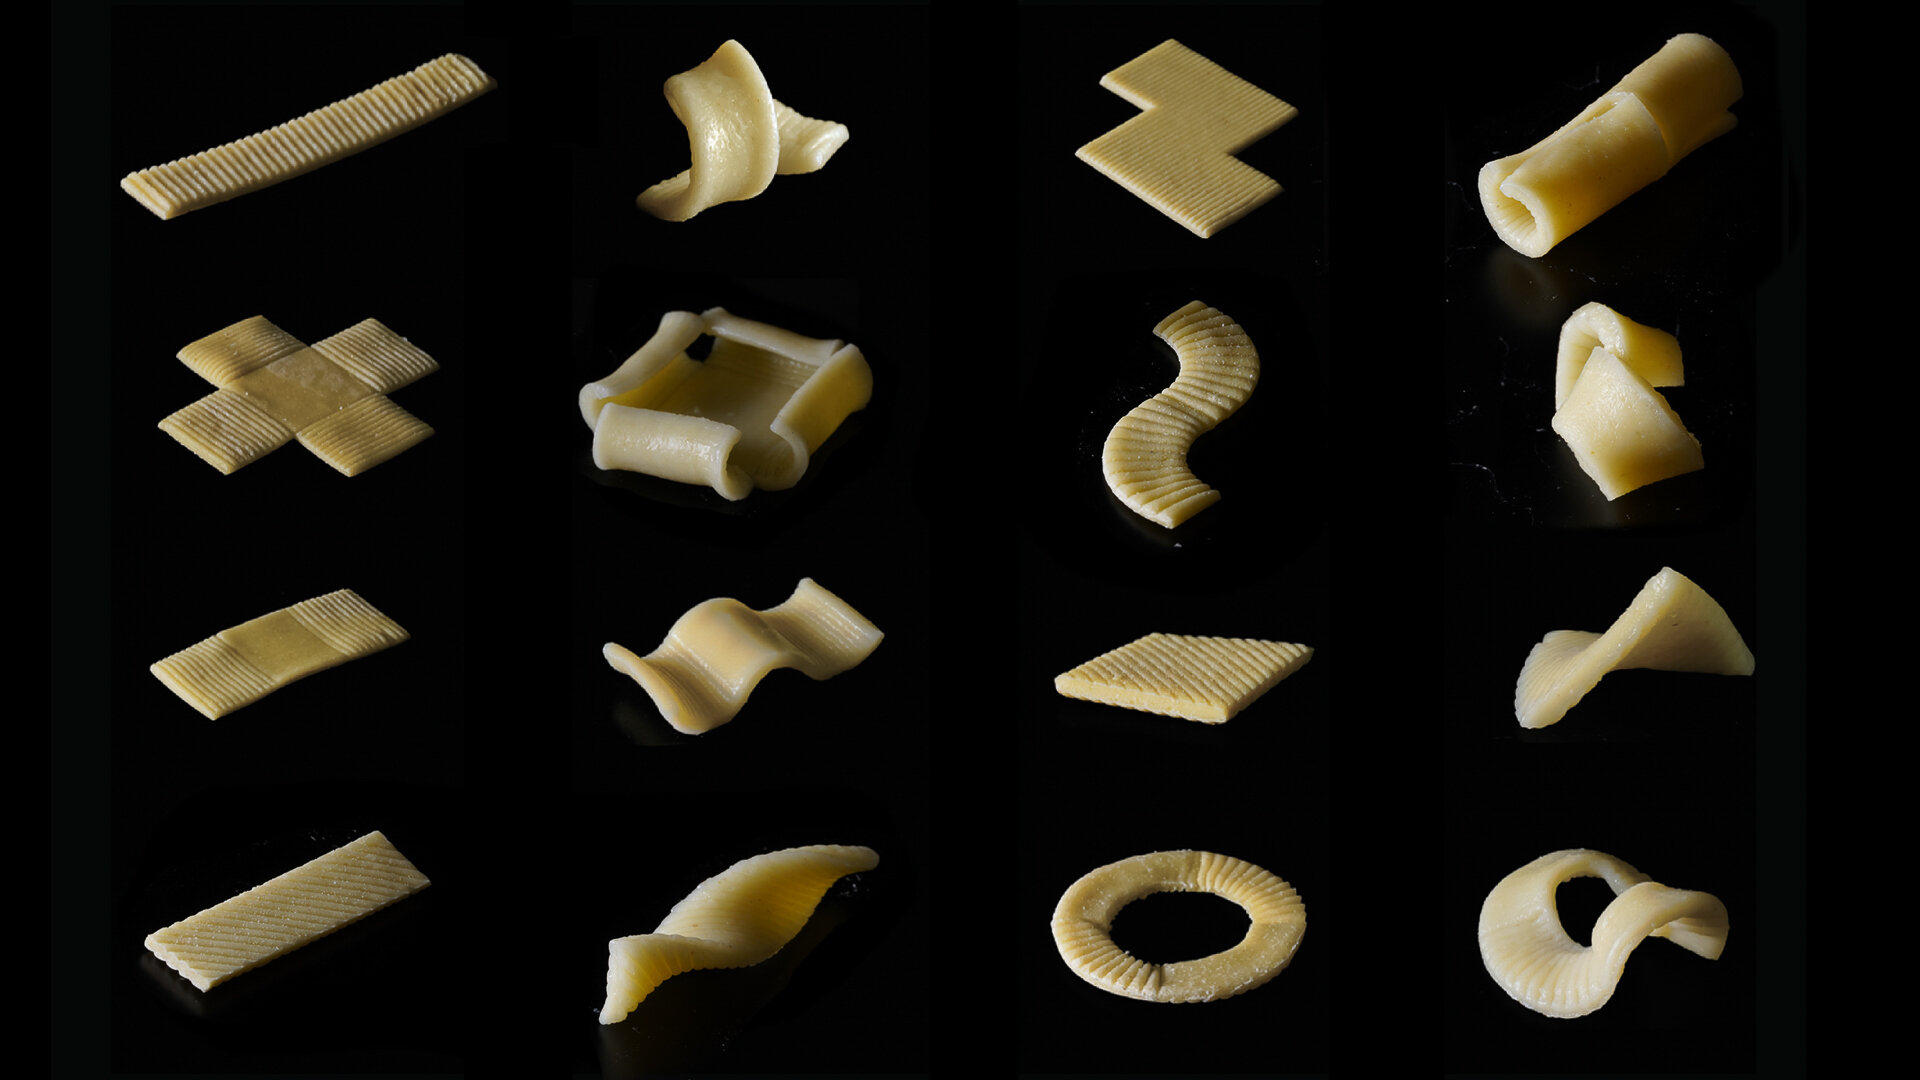 A photographic diagram showing different shapes of dried pasta next to their cooked form.